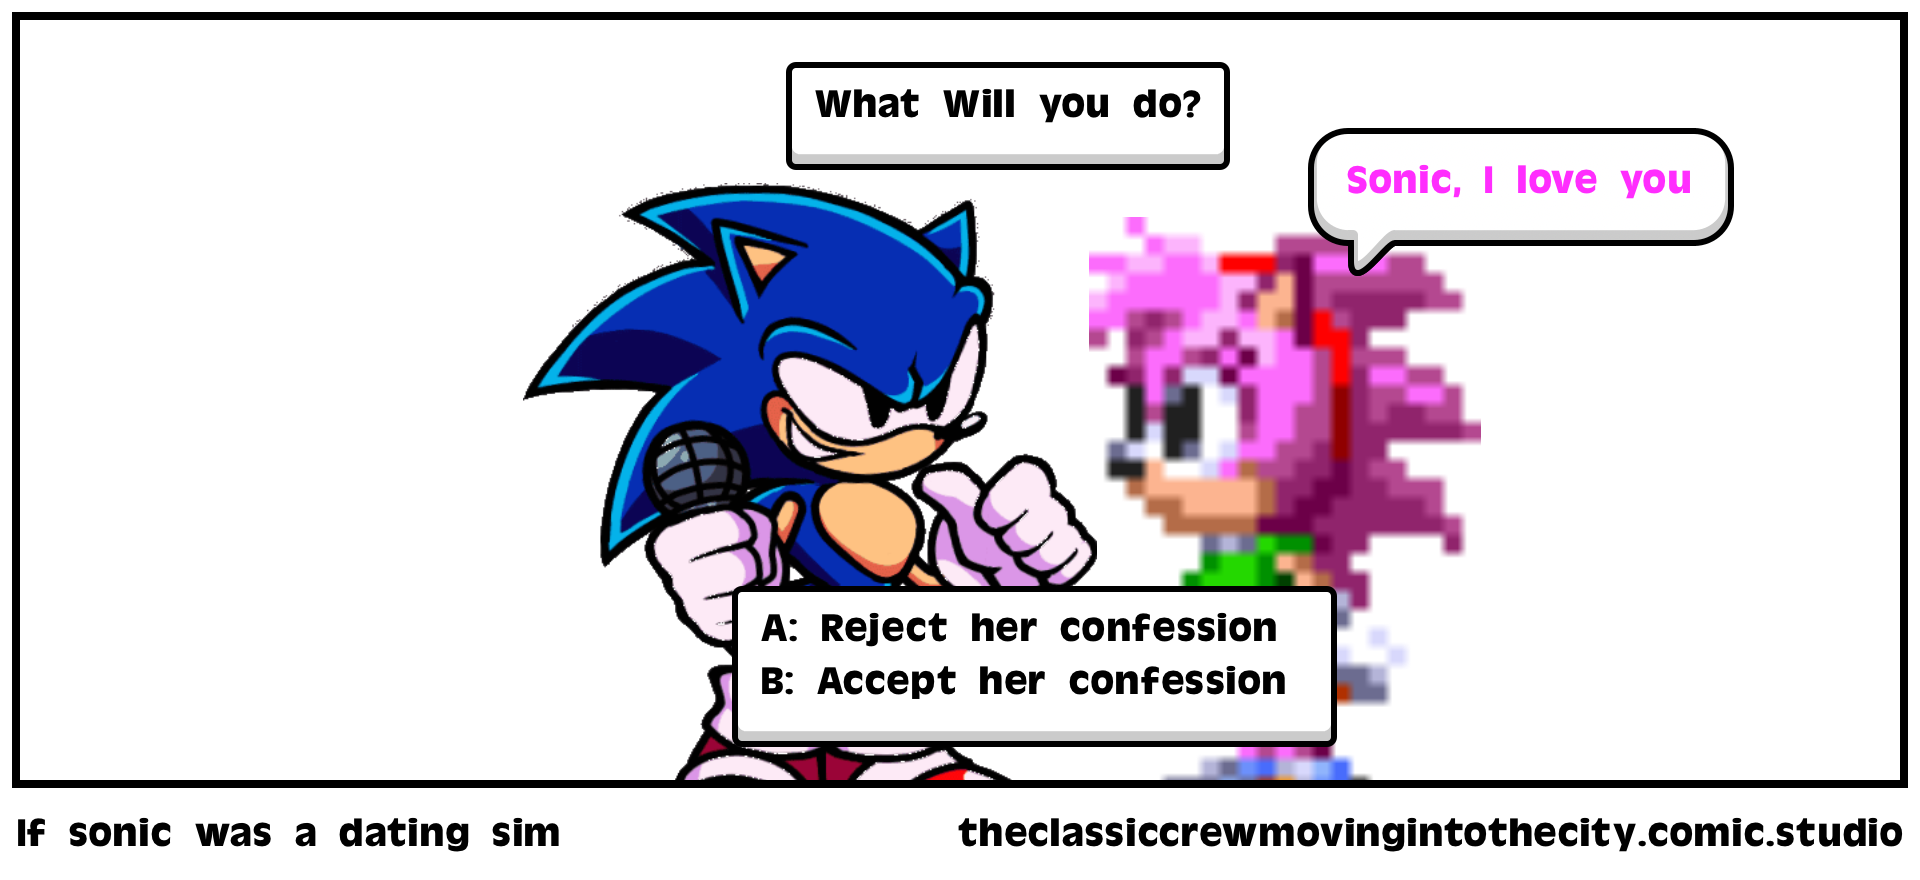 If sonic was a dating sim